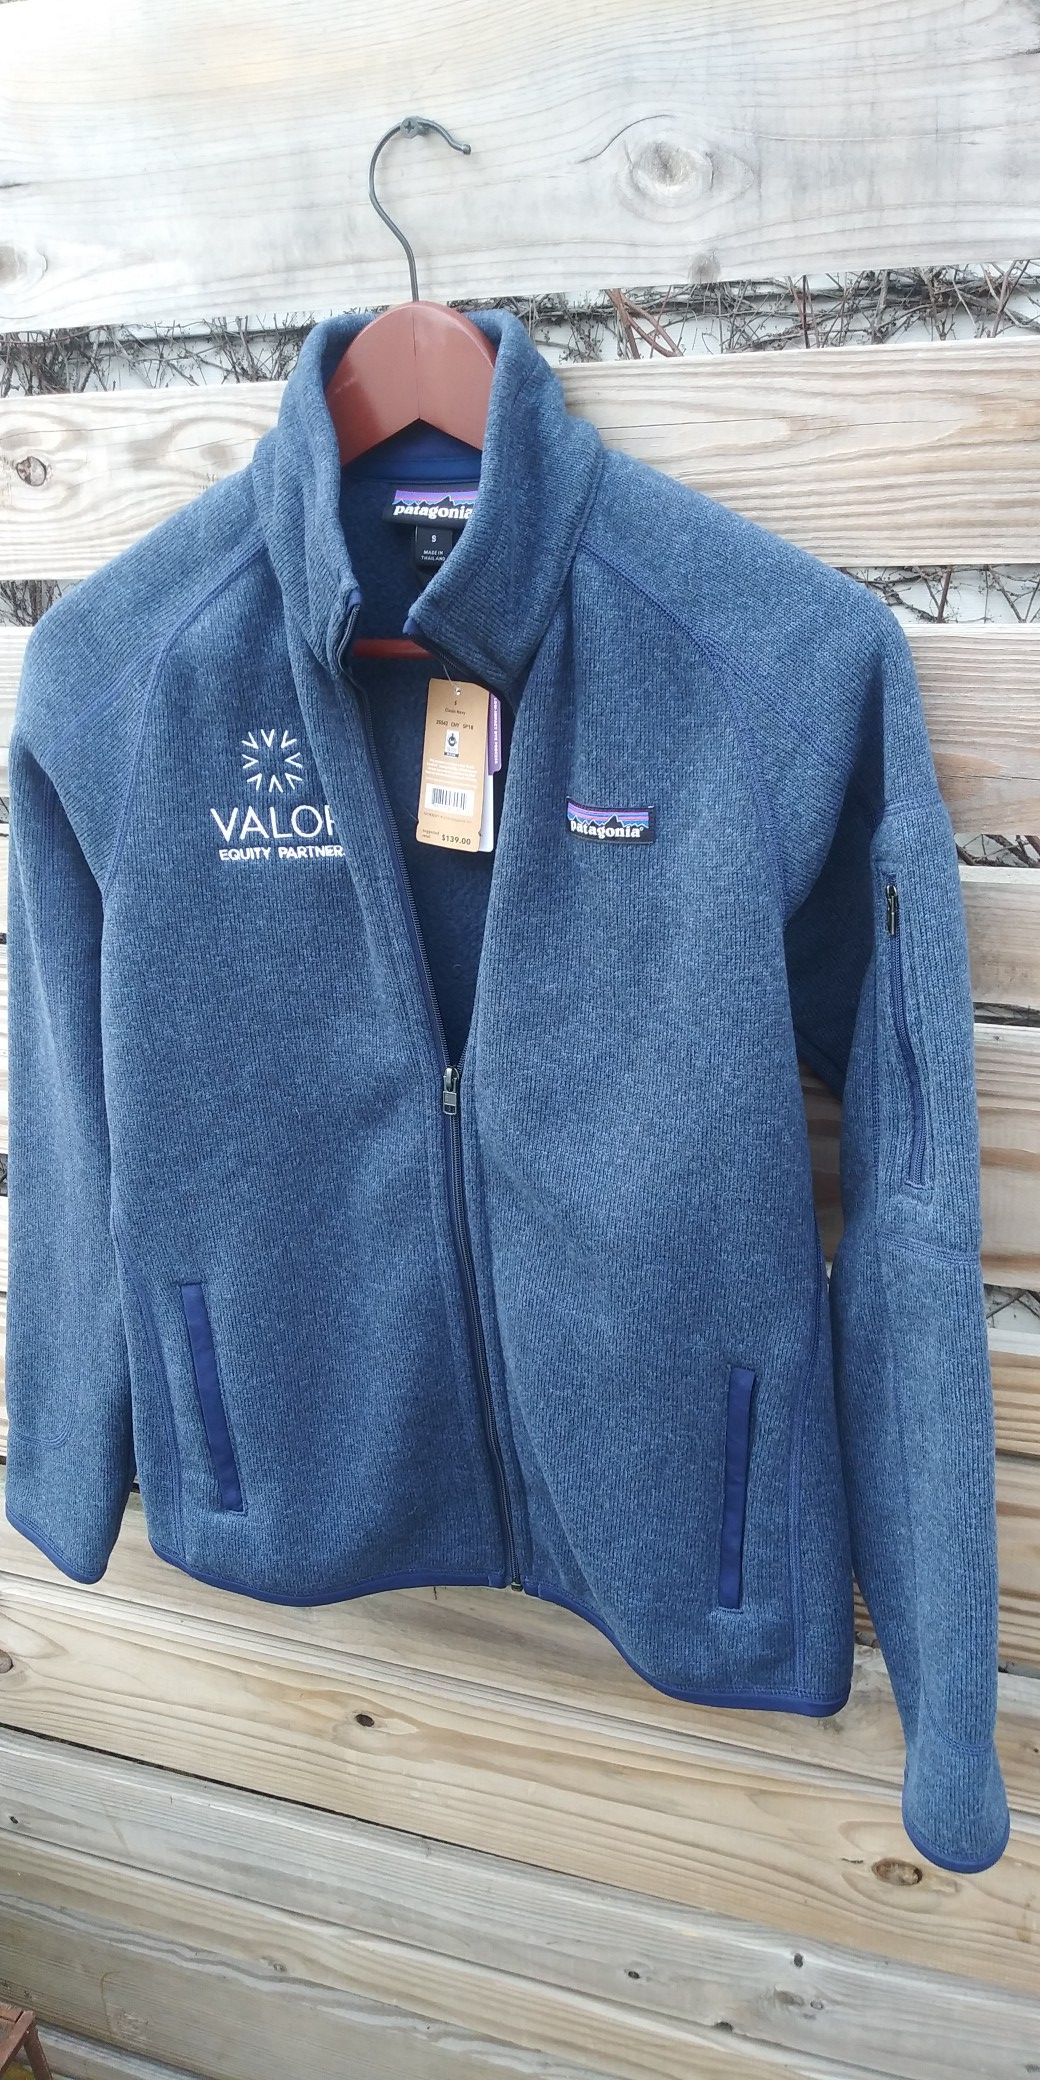 Patagonia sweater jacket for sale